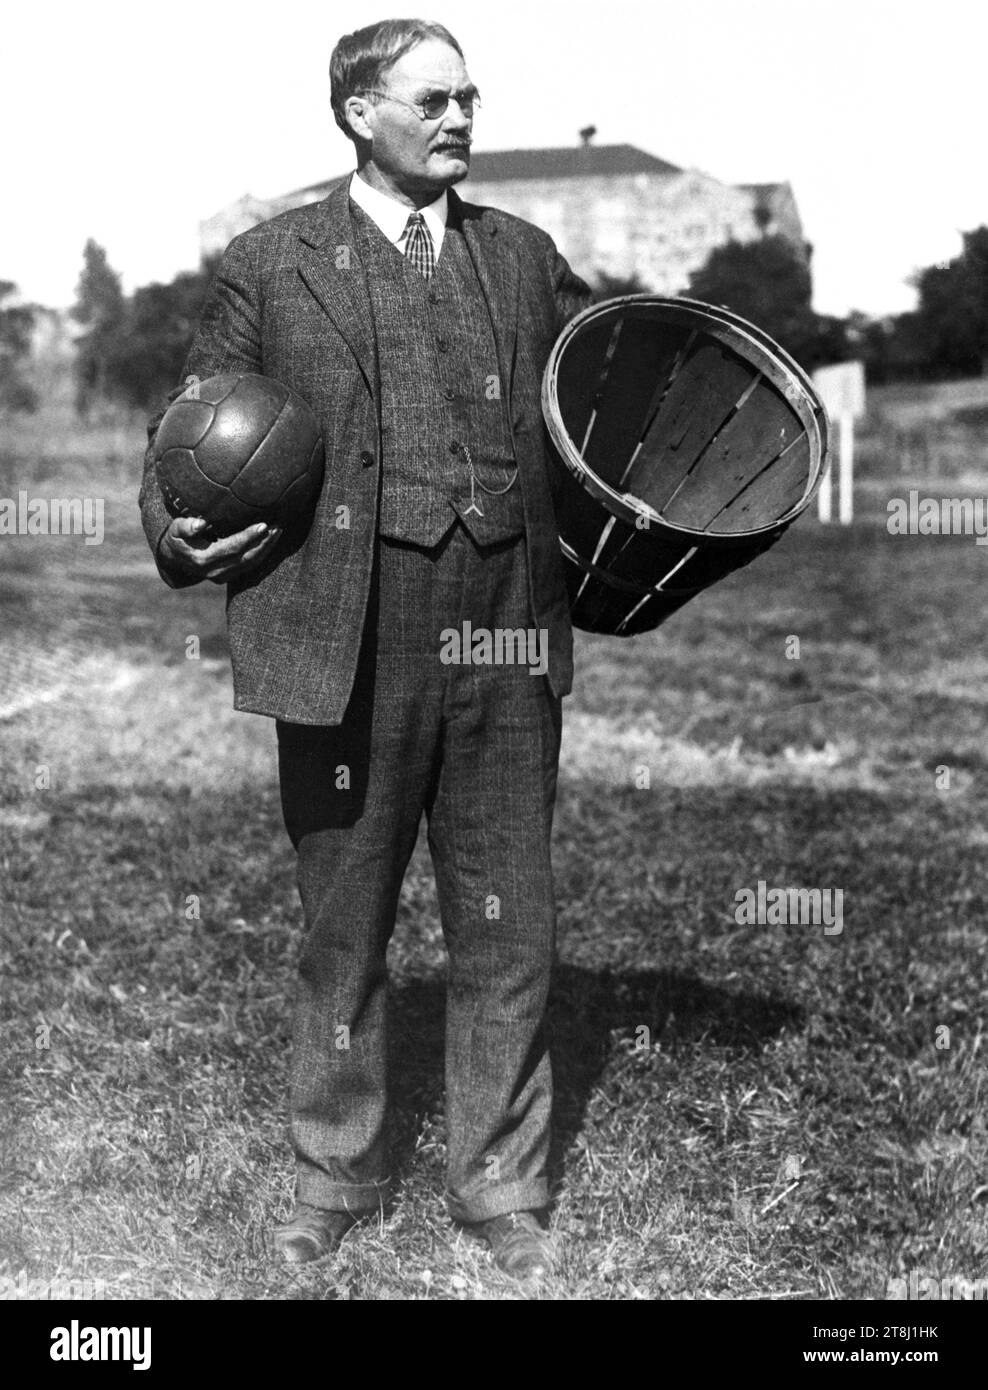 James Naismith (1861 – 1939) Canadian-American physical educator, known as the inventor of the game of basketball. Stock Photo